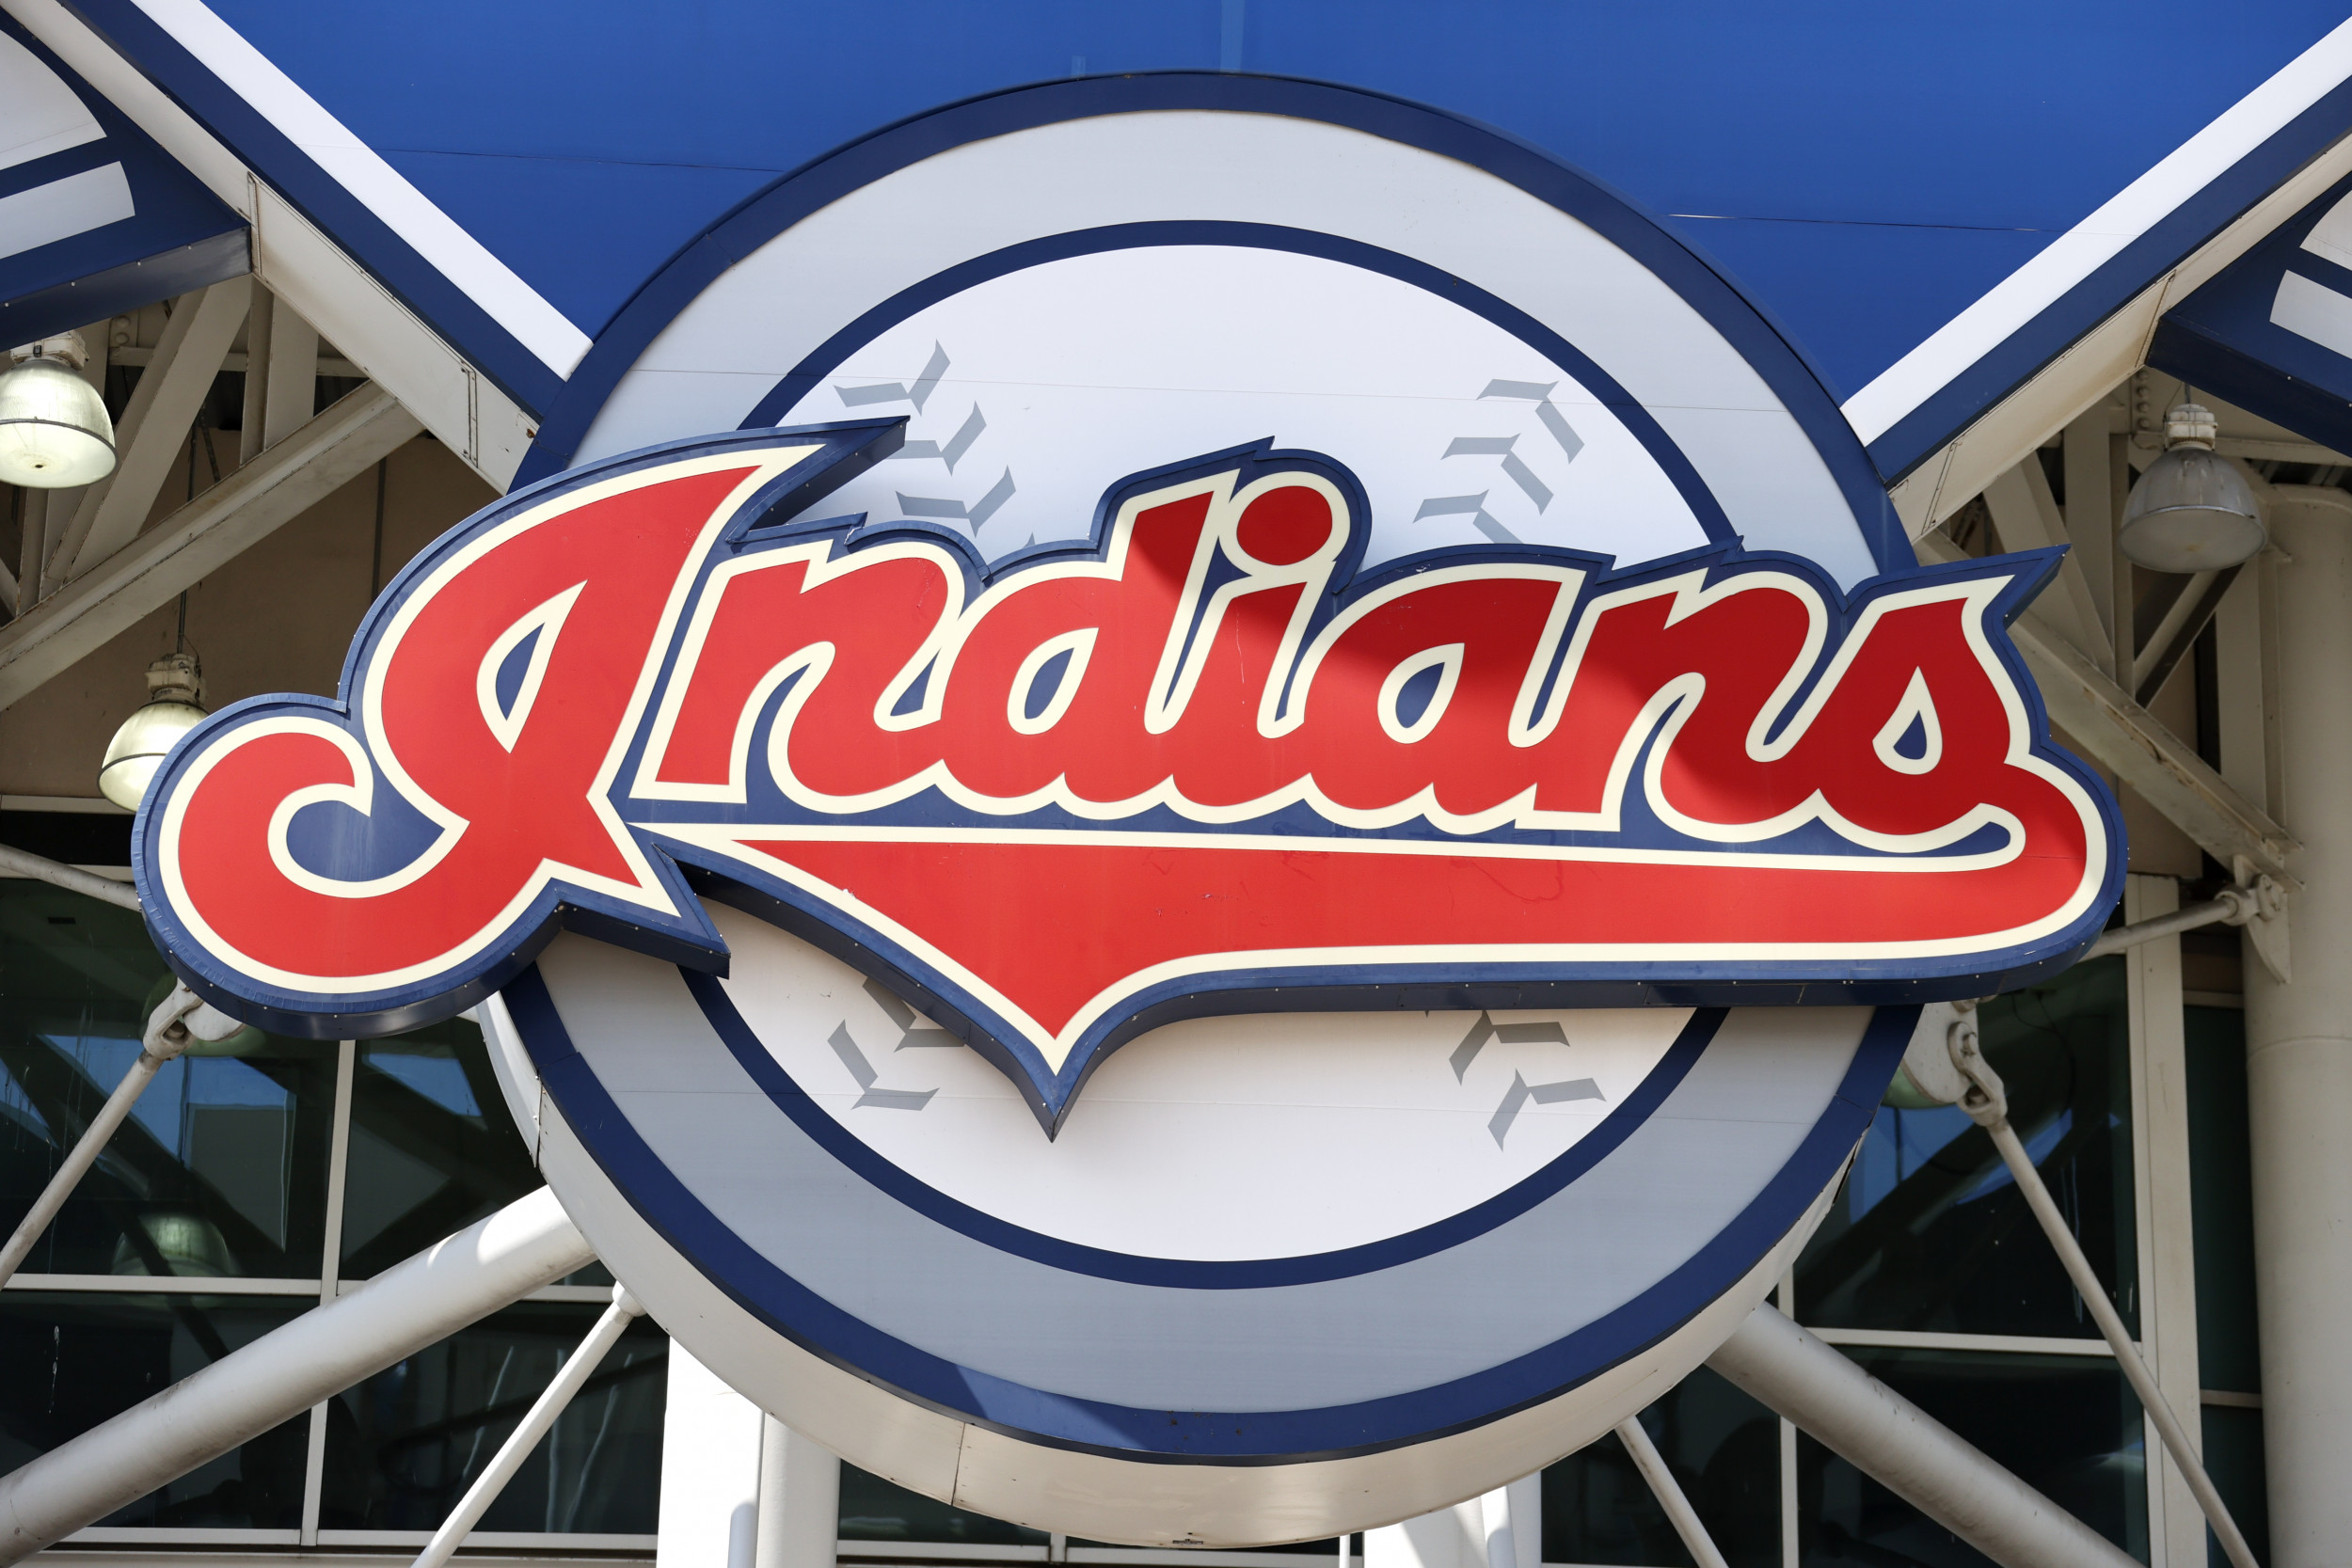 Cleveland changes MLB team nickname to Guardians after months of discussion